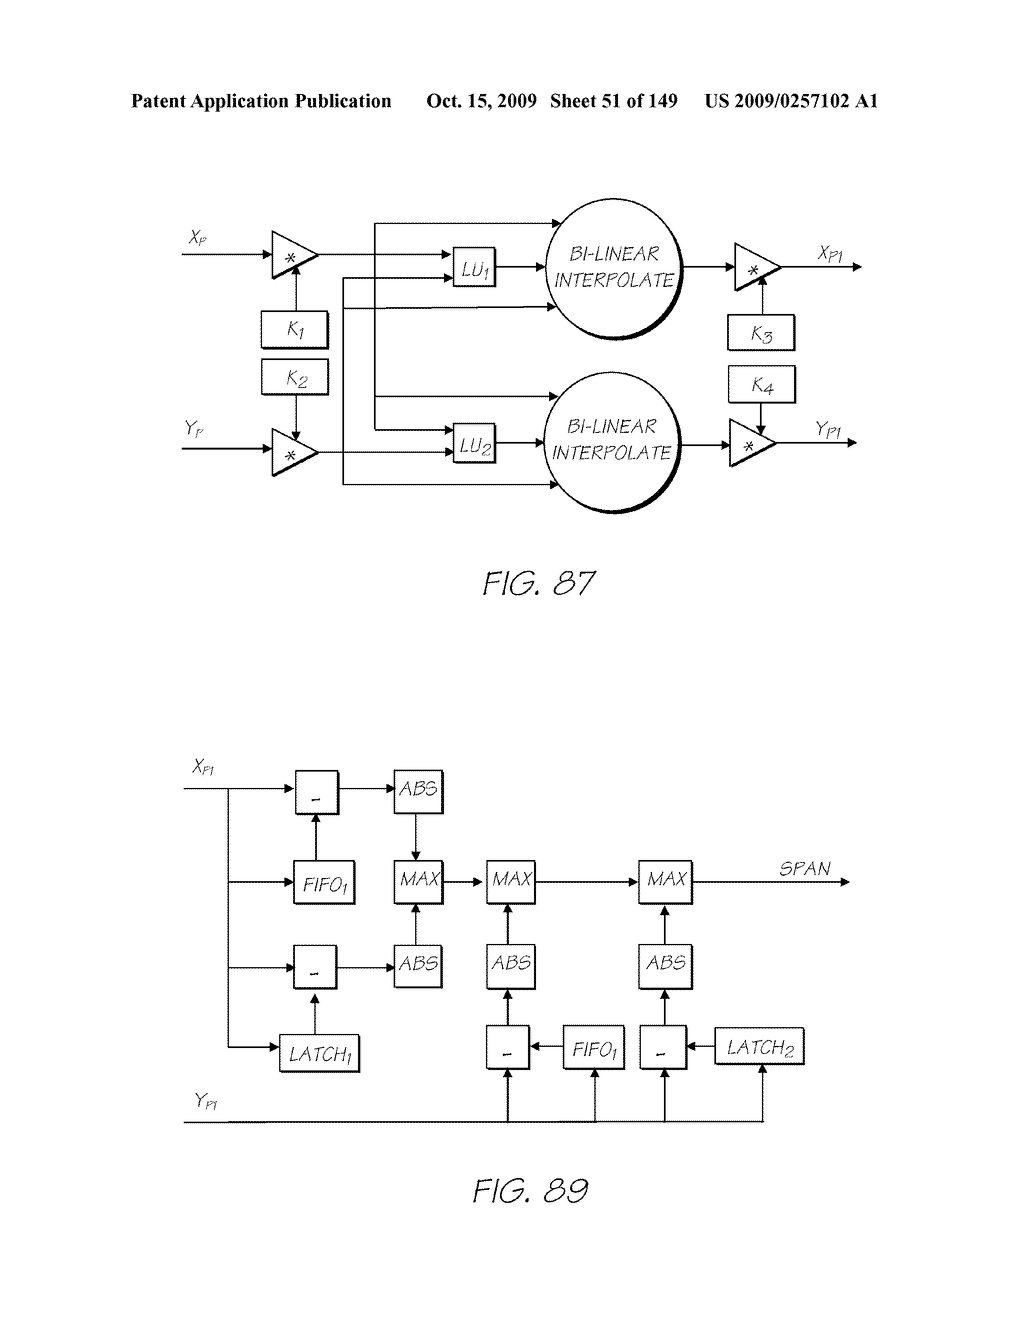 IMAGE PROCESSING APPARATUS HAVING CARD READER FOR APPLYING EFFECTS STORED ON A CARD TO A STORED IMAGE - diagram, schematic, and image 52